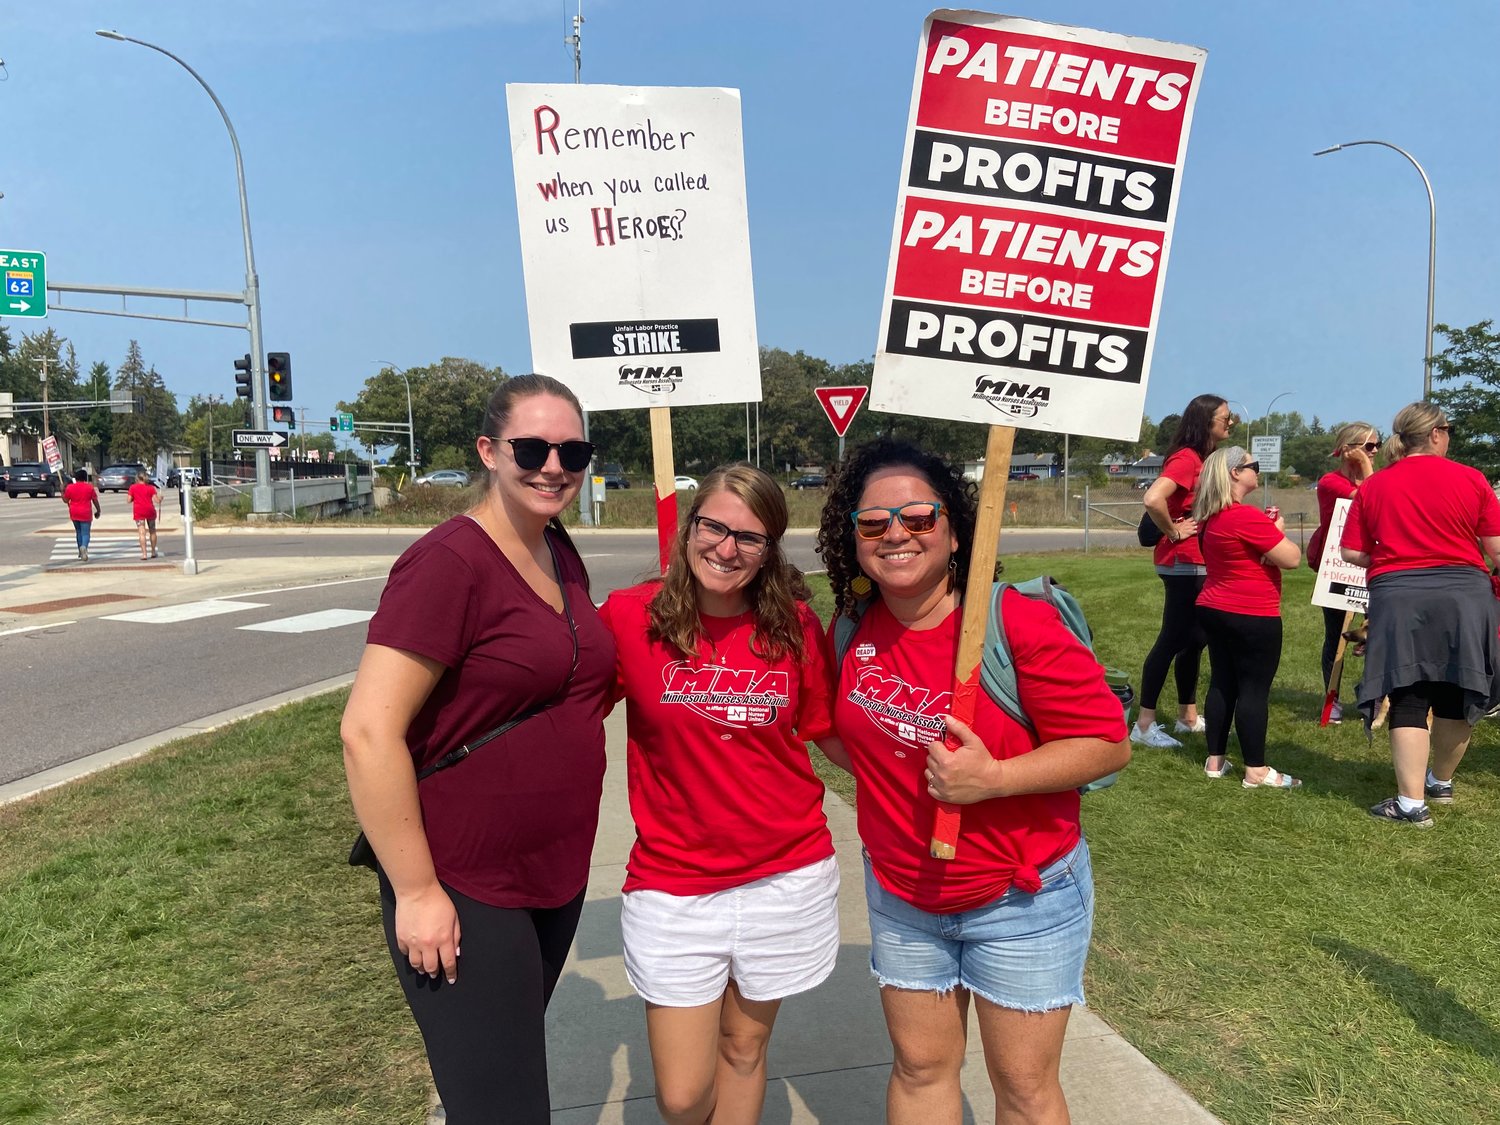 From left to right: Katie Dugan, Shawna Gebretsadik, and Carla Velez held signs on the picket line at M Health Fairview Hospital Southdale at 6401 France Ave S, Edina on Sept. 14th, 2022. "We're out here so it's better inside," Gebretsadik said.